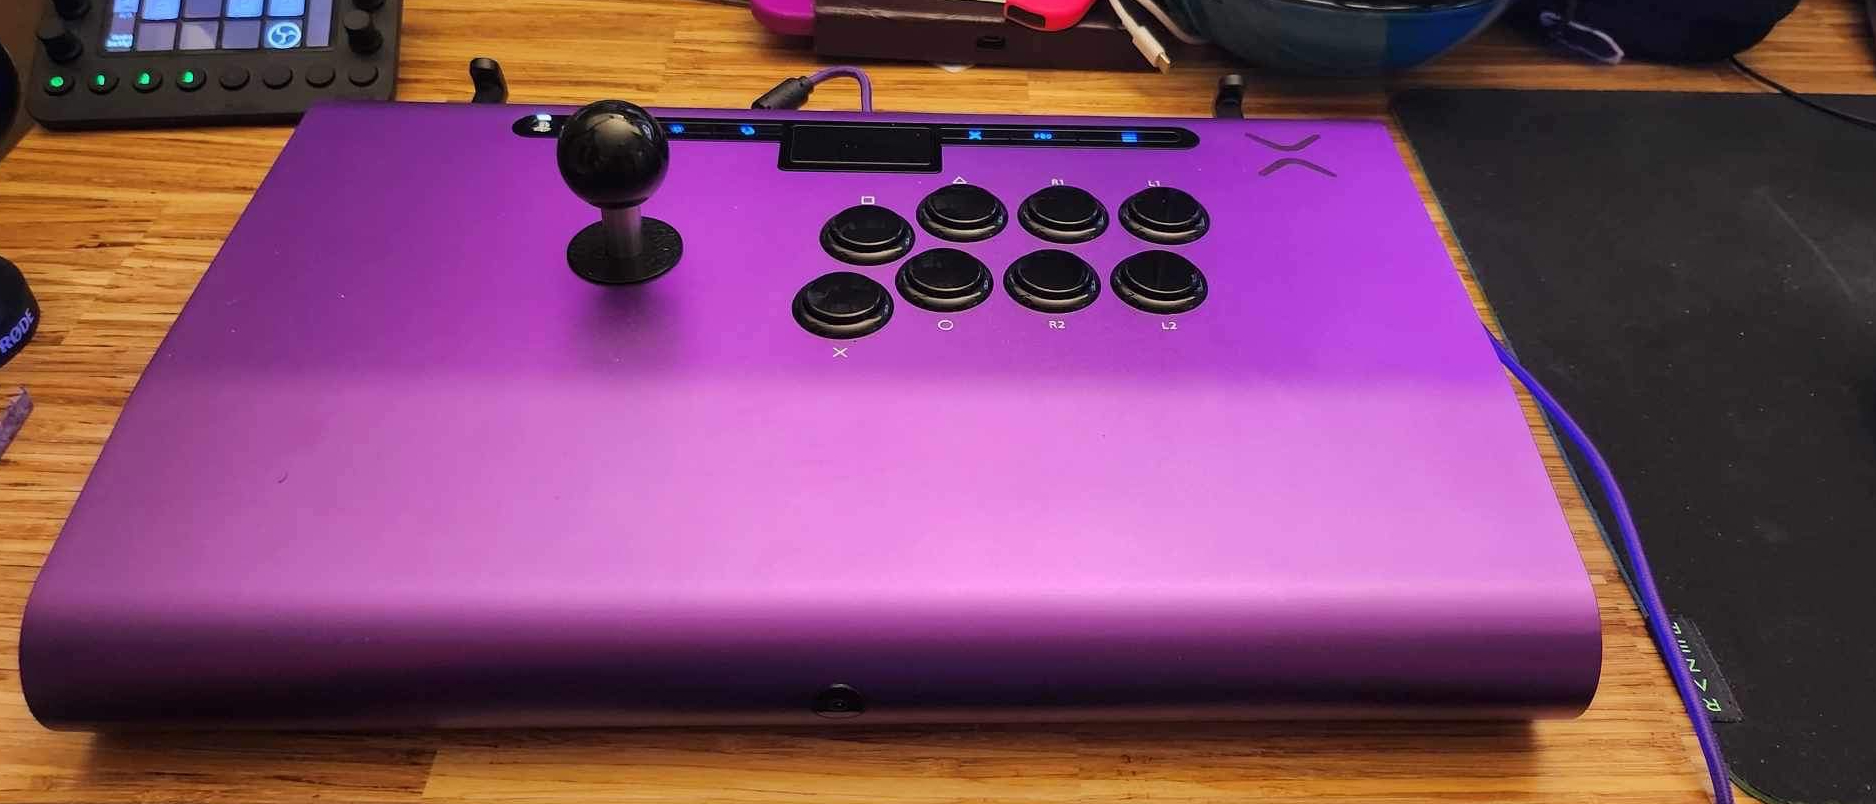 Victrix Pro FS review - one of the best fight sticks ever made 